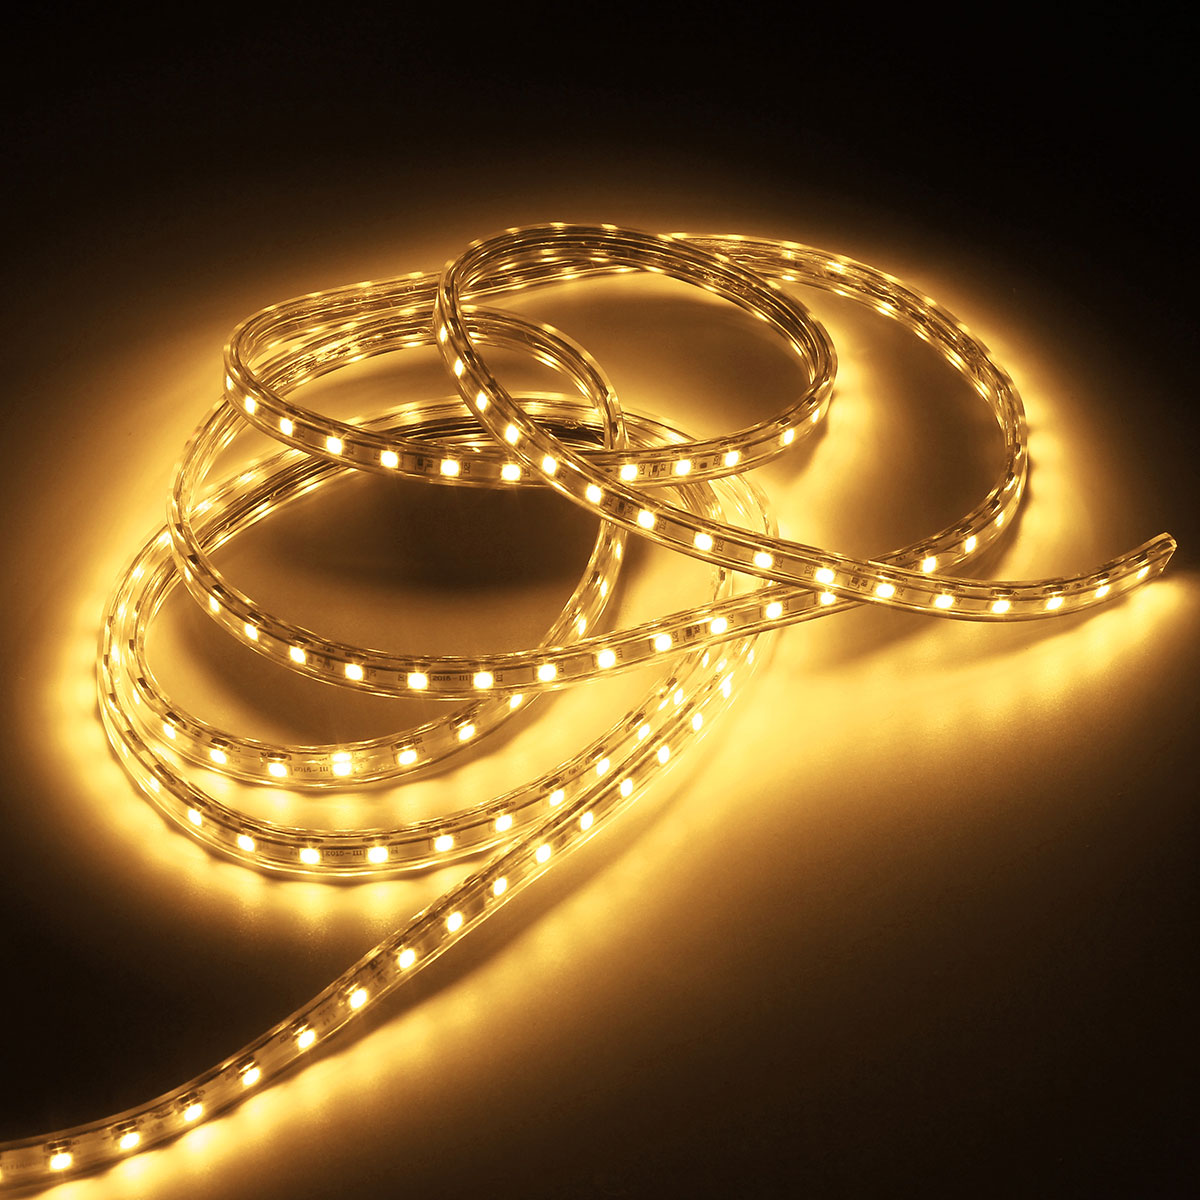 220V-3M-5050-LED-SMD-Outdoor-Waterproof-Flexible-Tape-Rope-Strip-Light-Xmas-1066318-9